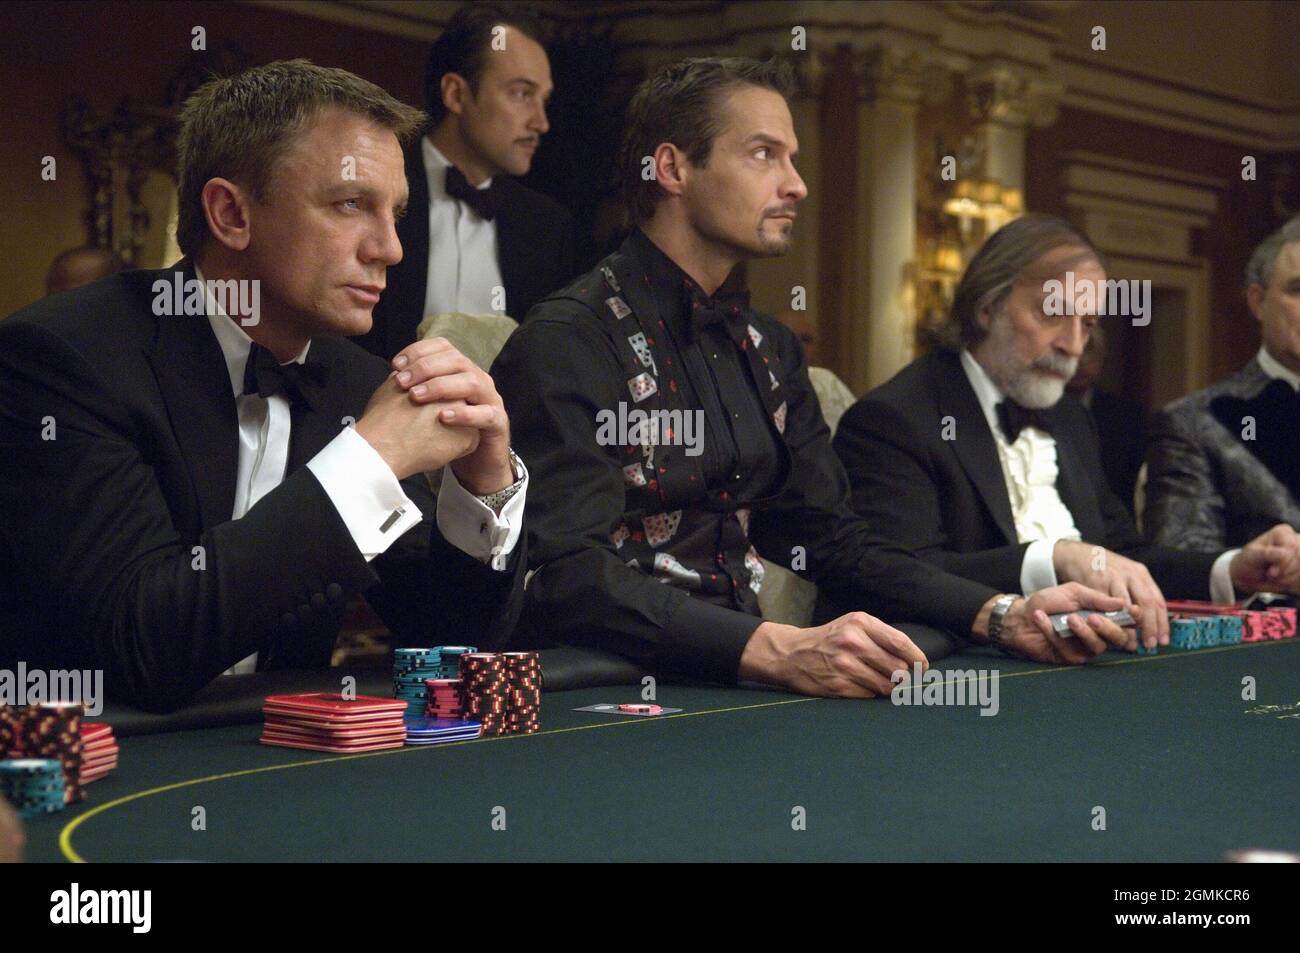 Daniel Craig Casino Royale Film High Resolution Stock Photography and  Images - Alamy